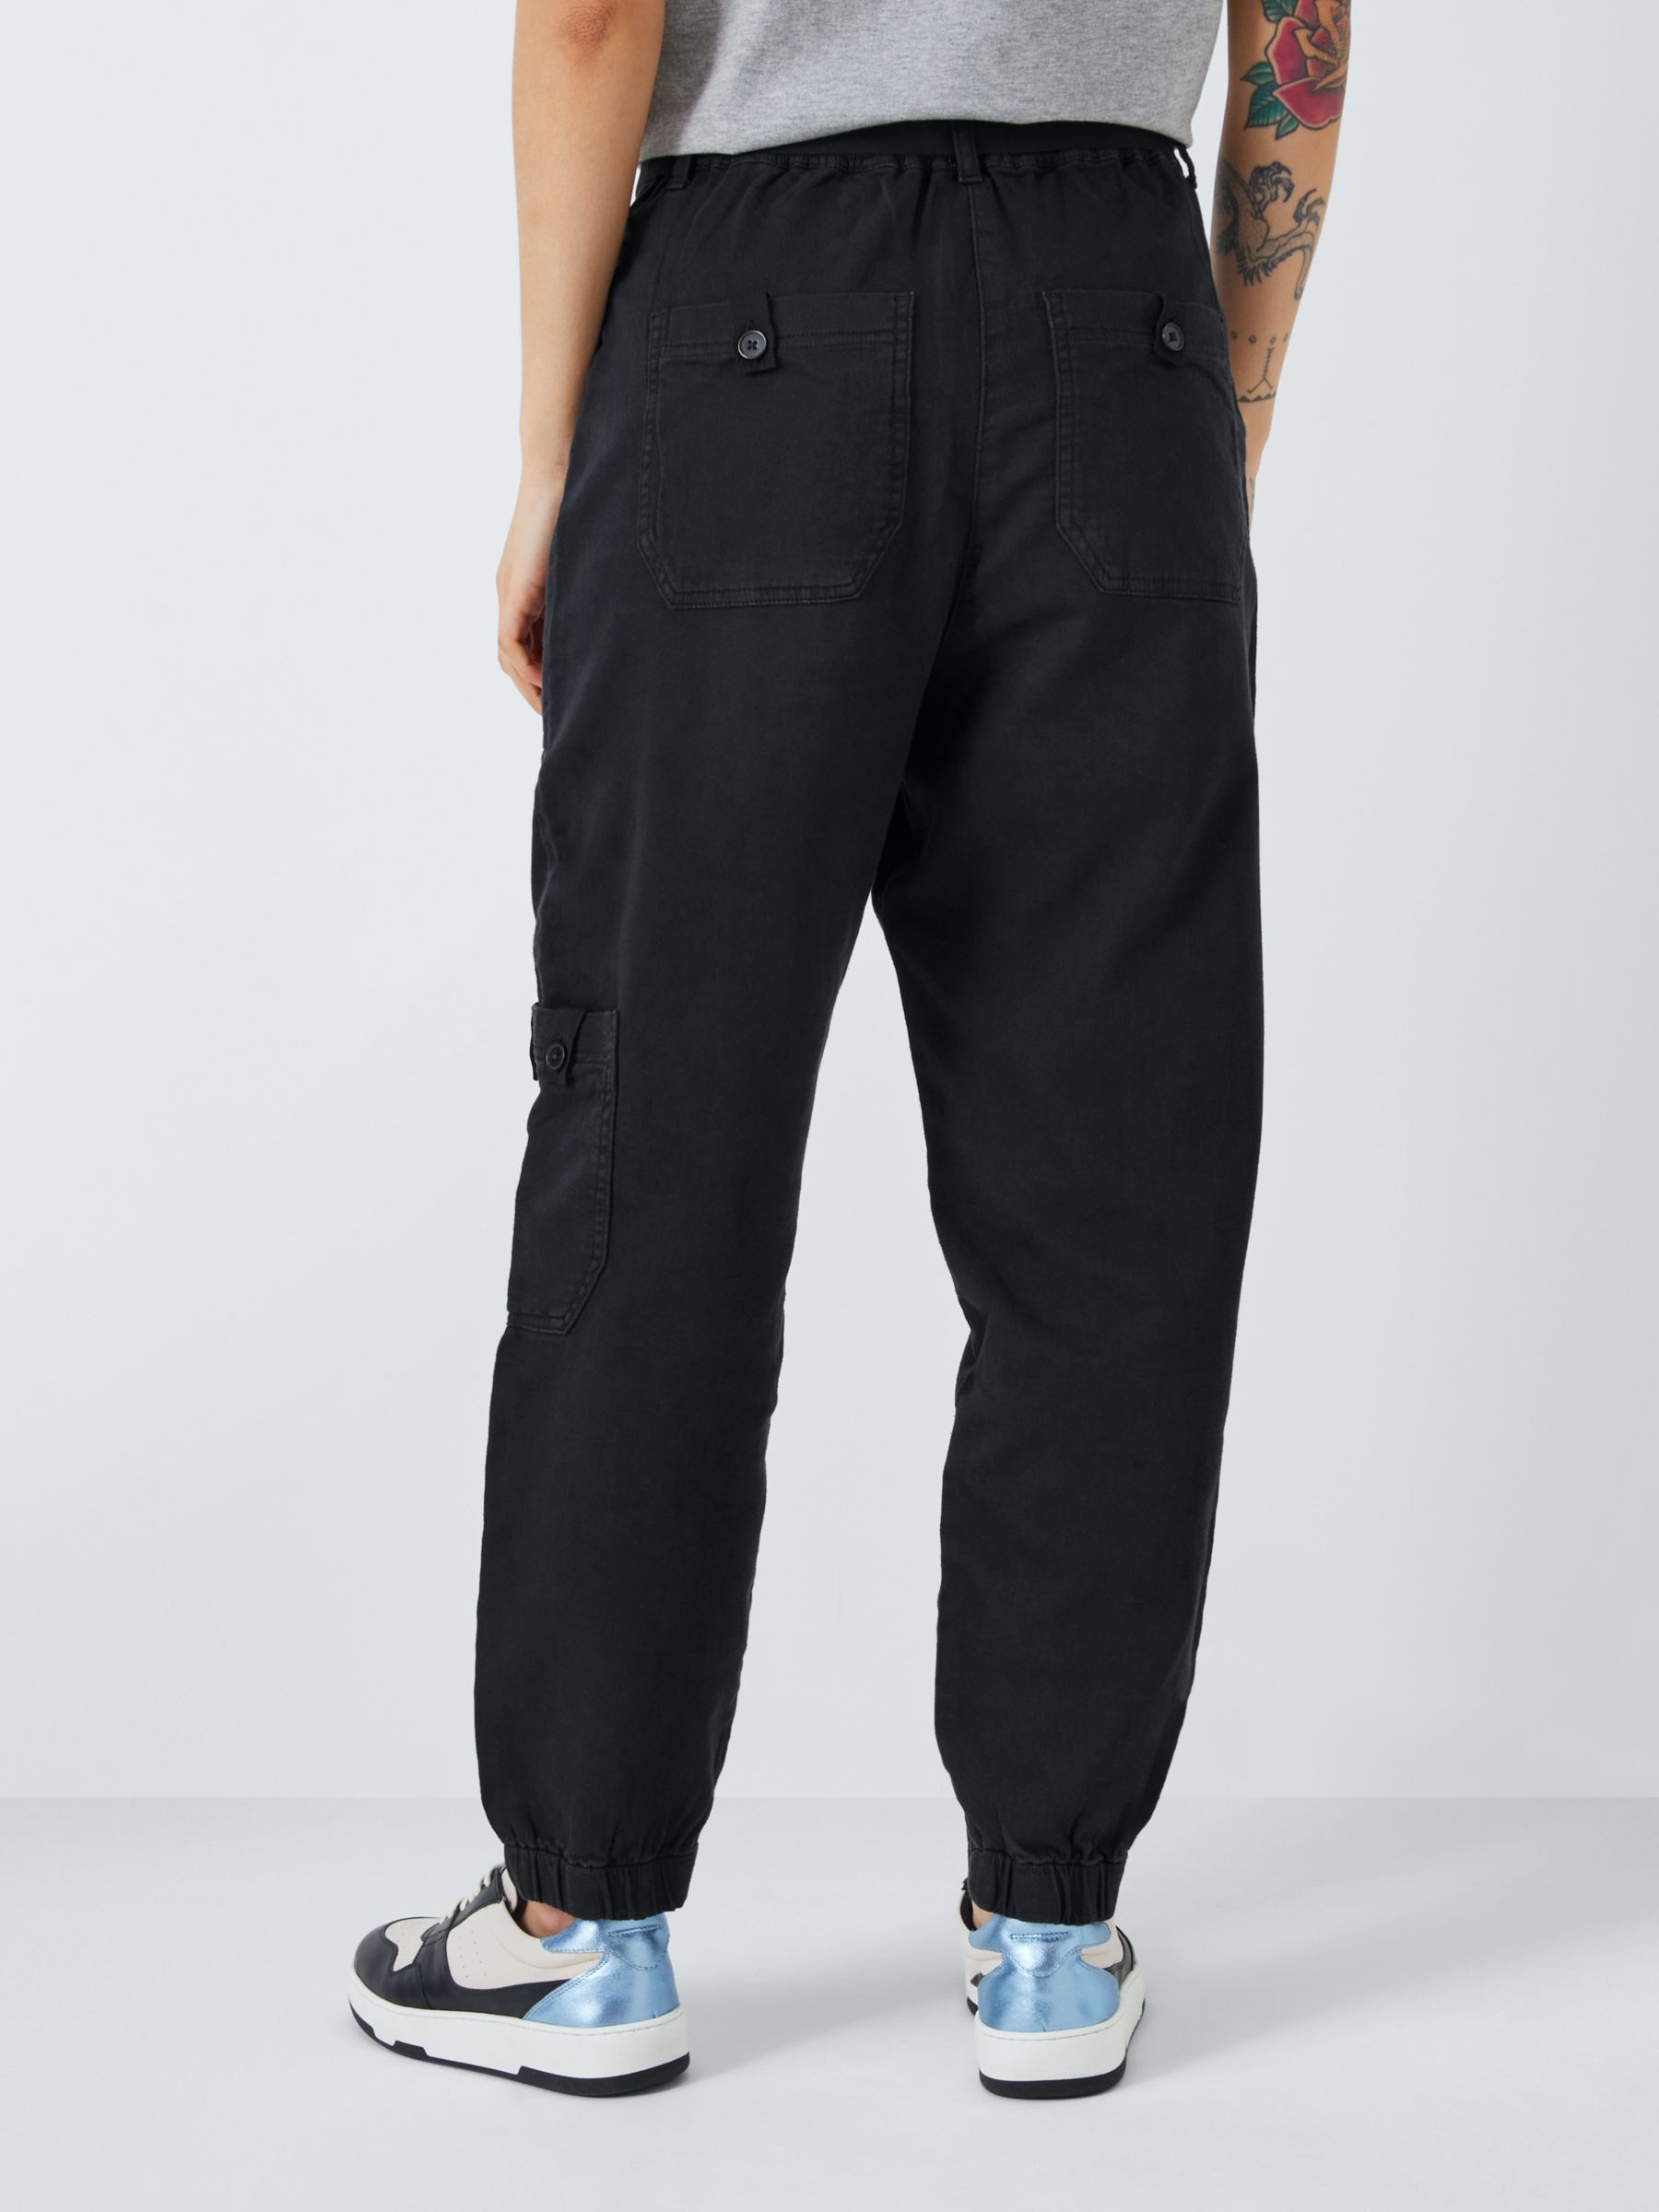 AND/OR Caitlin Cargo Trousers, Black, 6